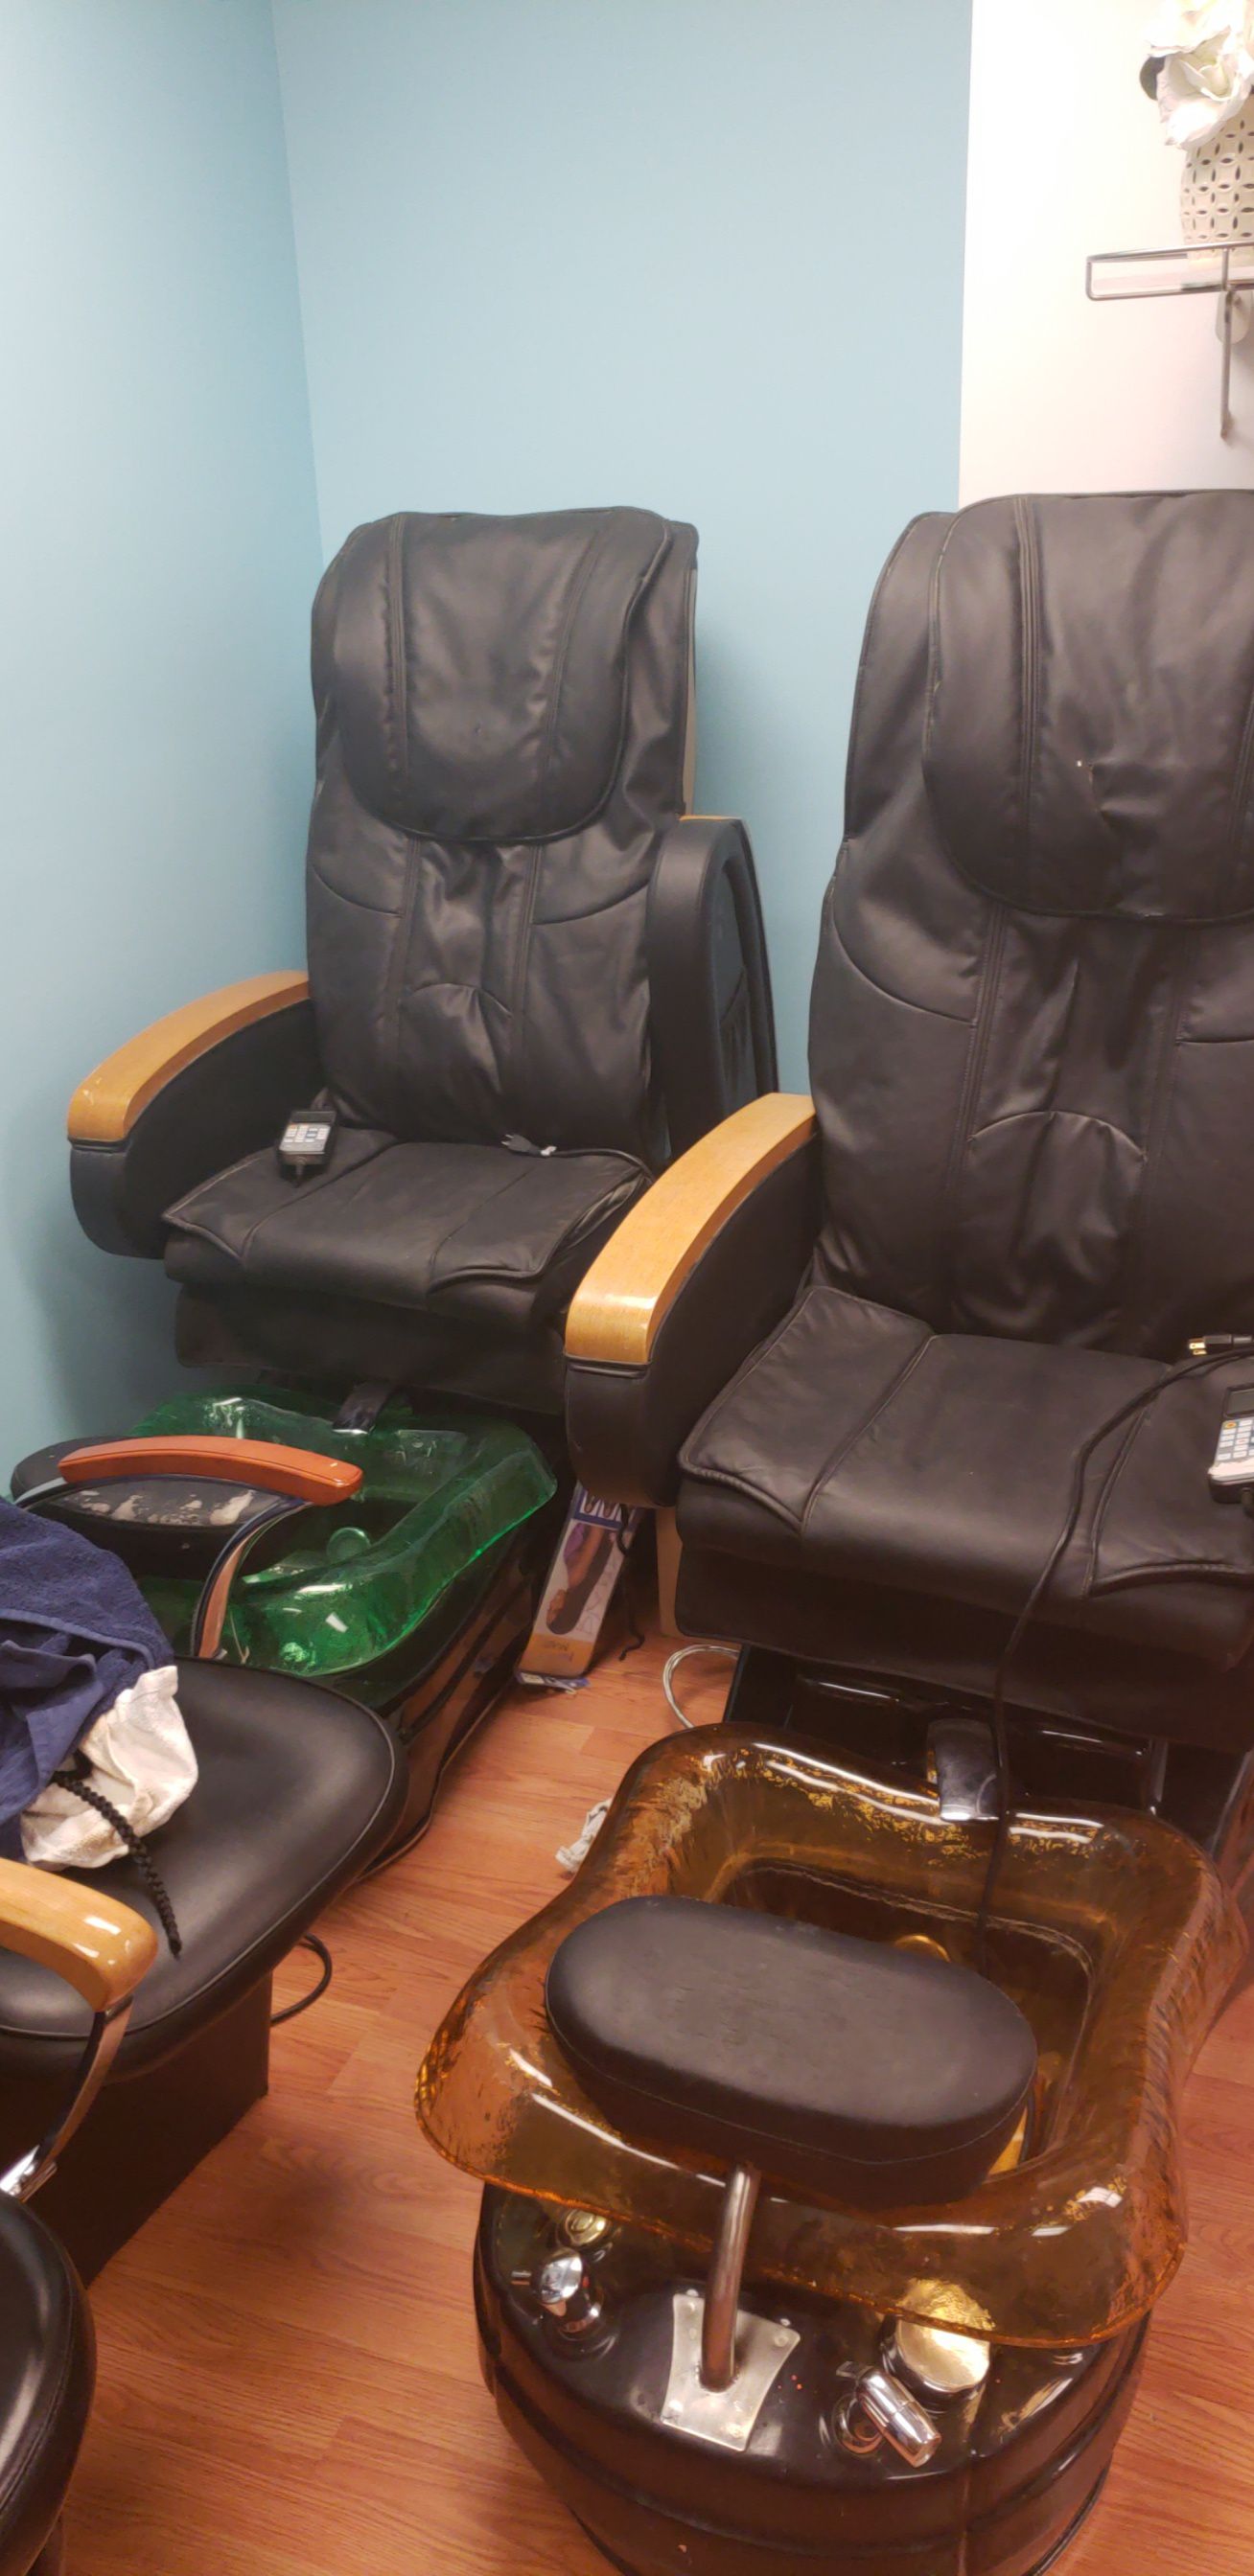 Pedicure chairs for FREE